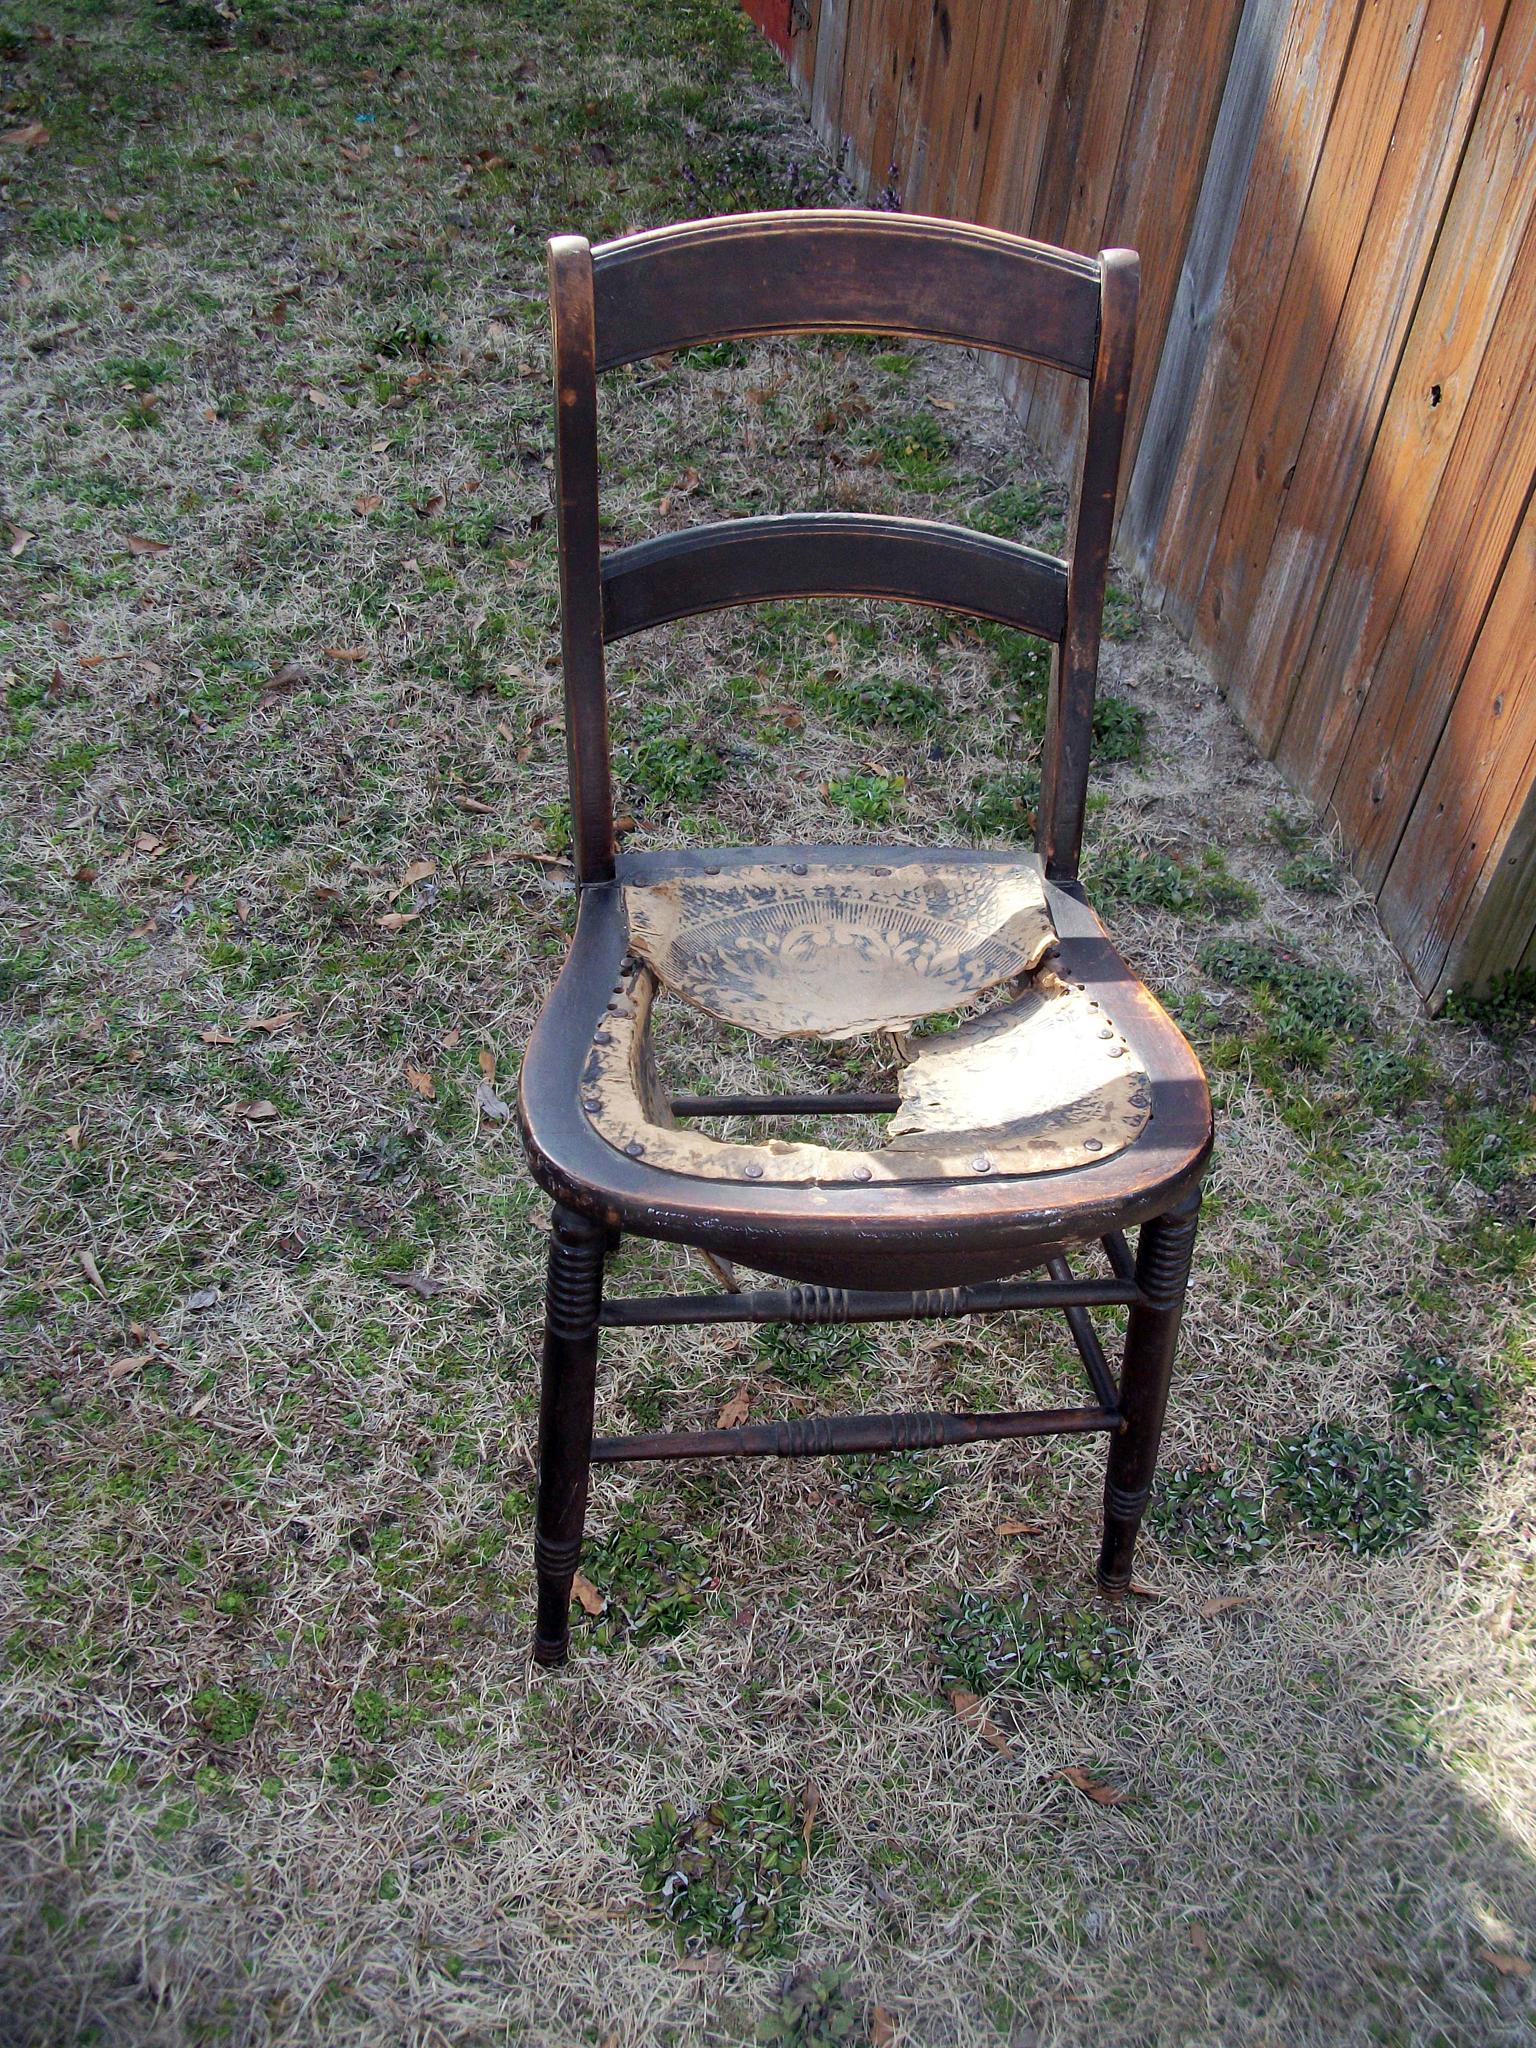 Lot 29: Vintage Hall Chair With Leather Braded Seating (Needs Repair)